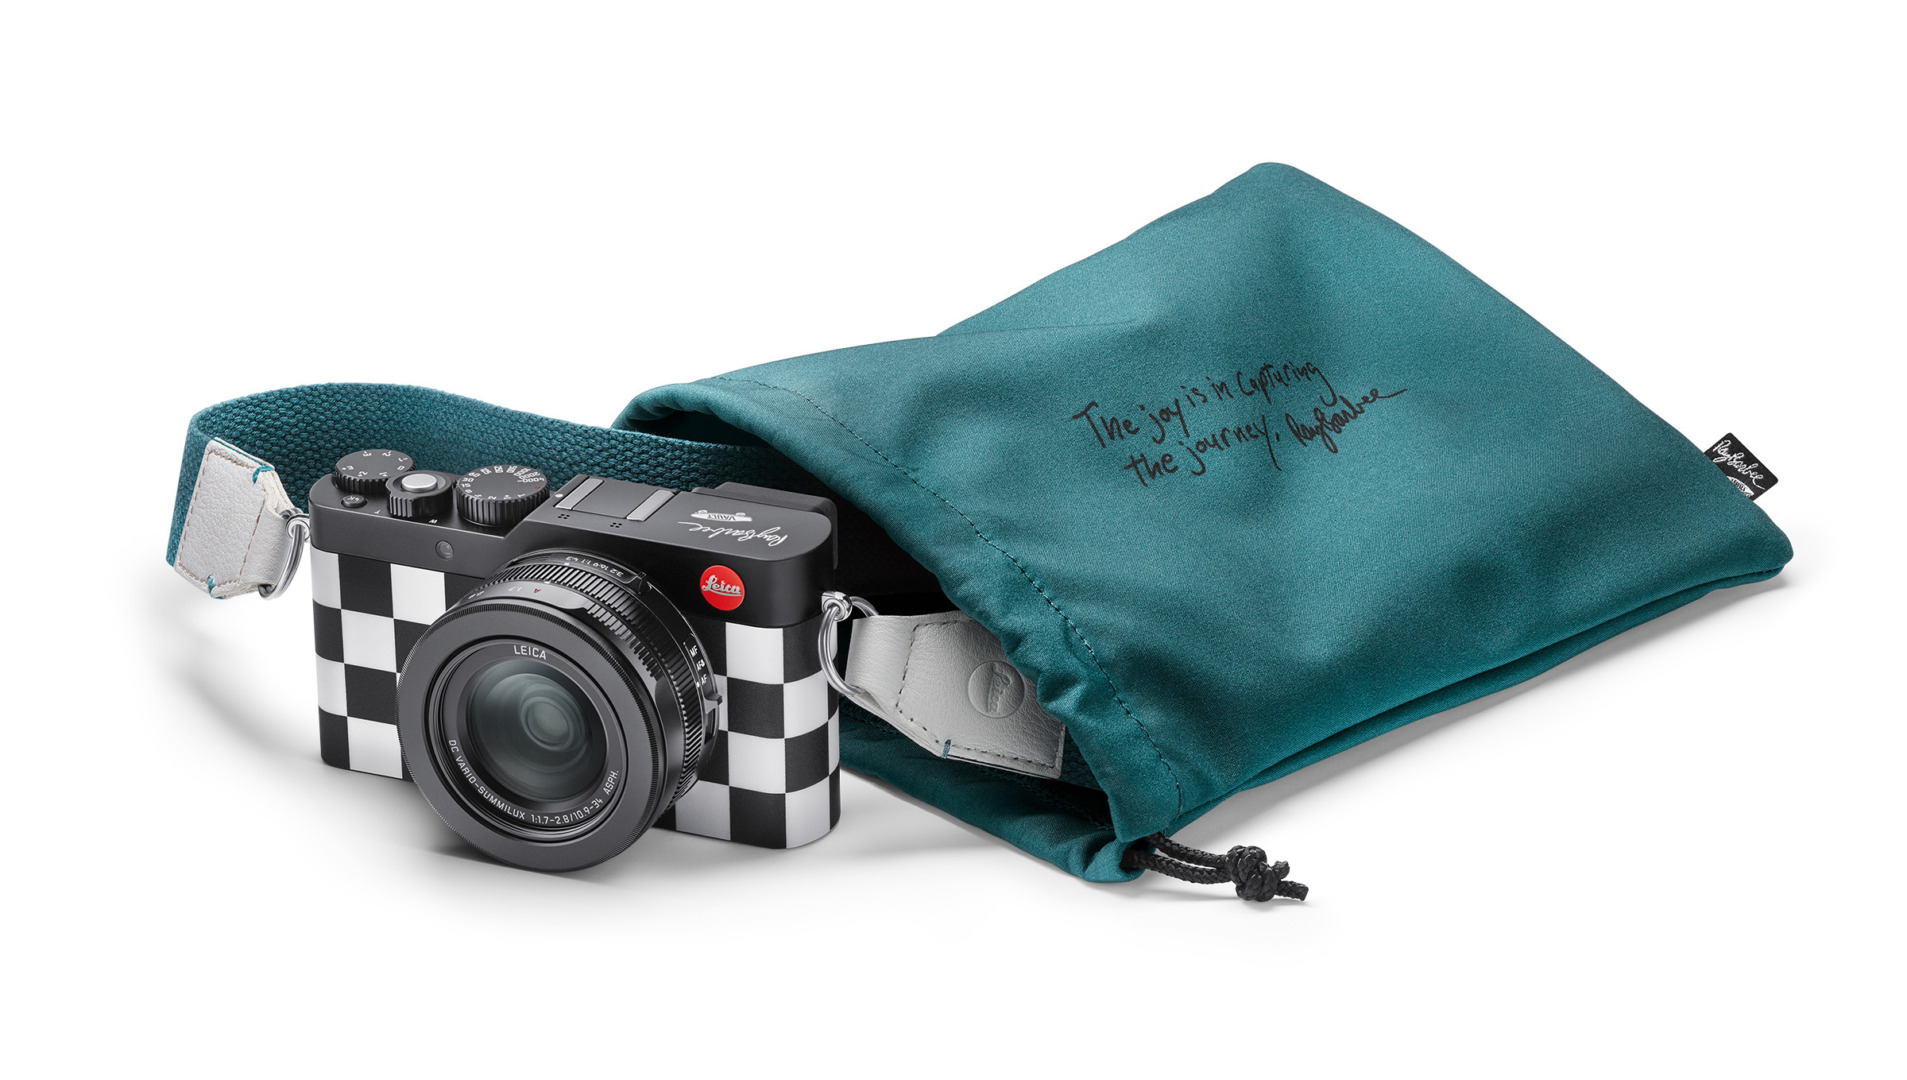 Leica D-Lux 7 Compact Camera Released